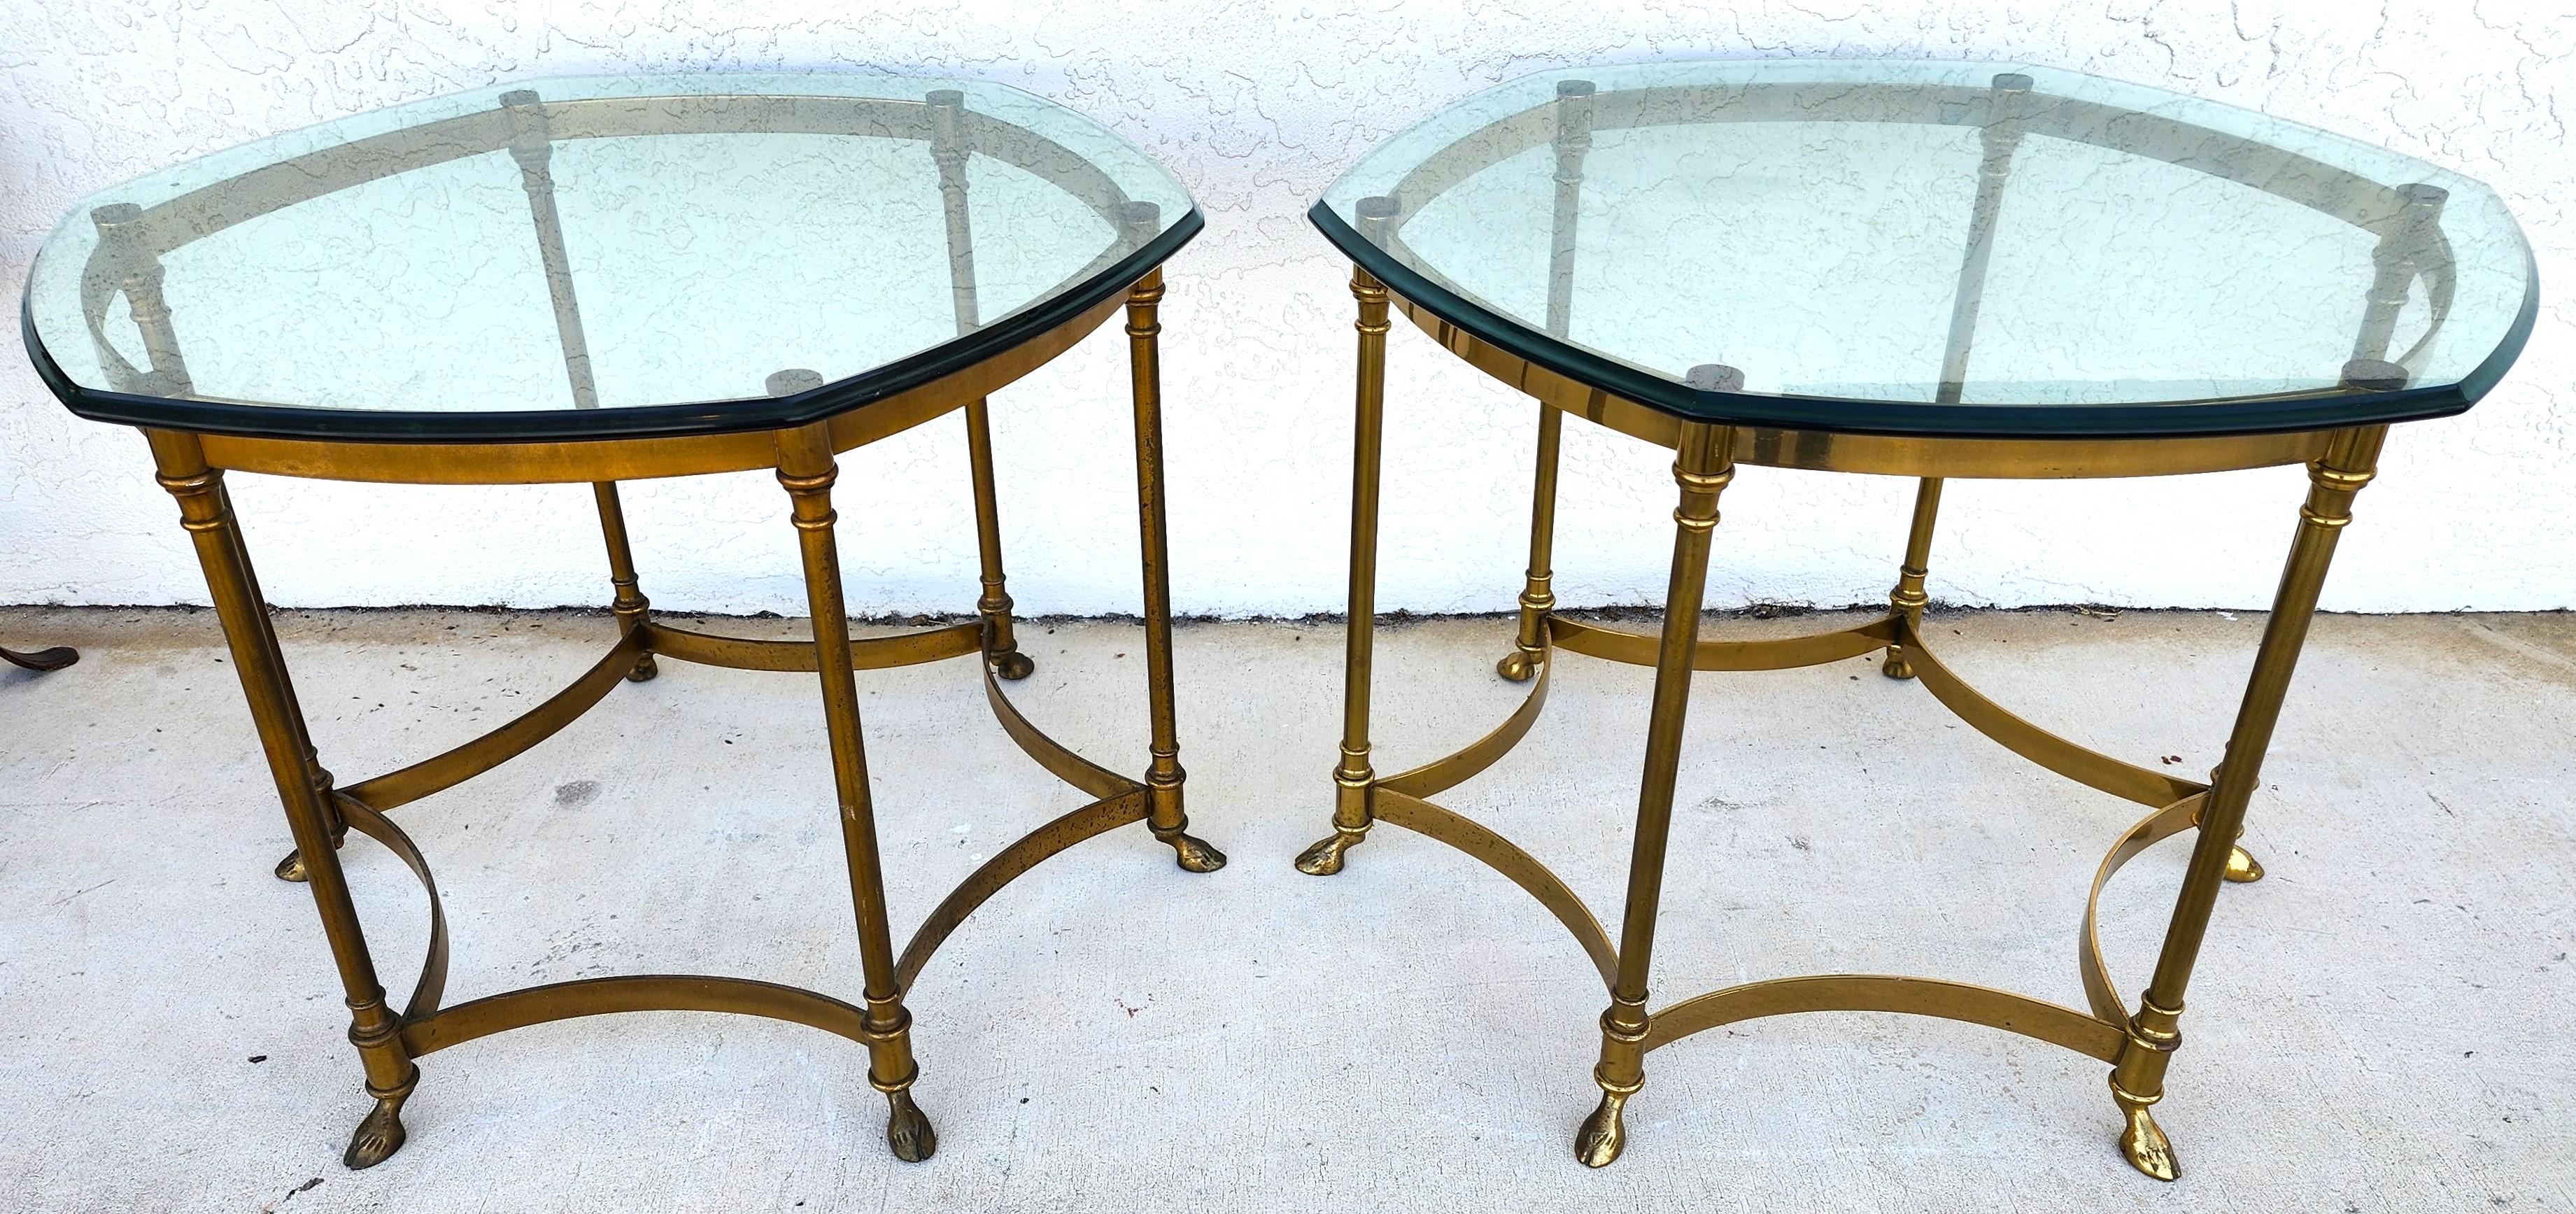 For FULL item description click on CONTINUE READING at the bottom of this page.
Offering One Of Our Recent Palm Beach Estate Fine Furniture Acquisitions Of A
Rare Pair of Labarge Brass & Glass Hoof Footed Octagonal Side Tables
Come with the original